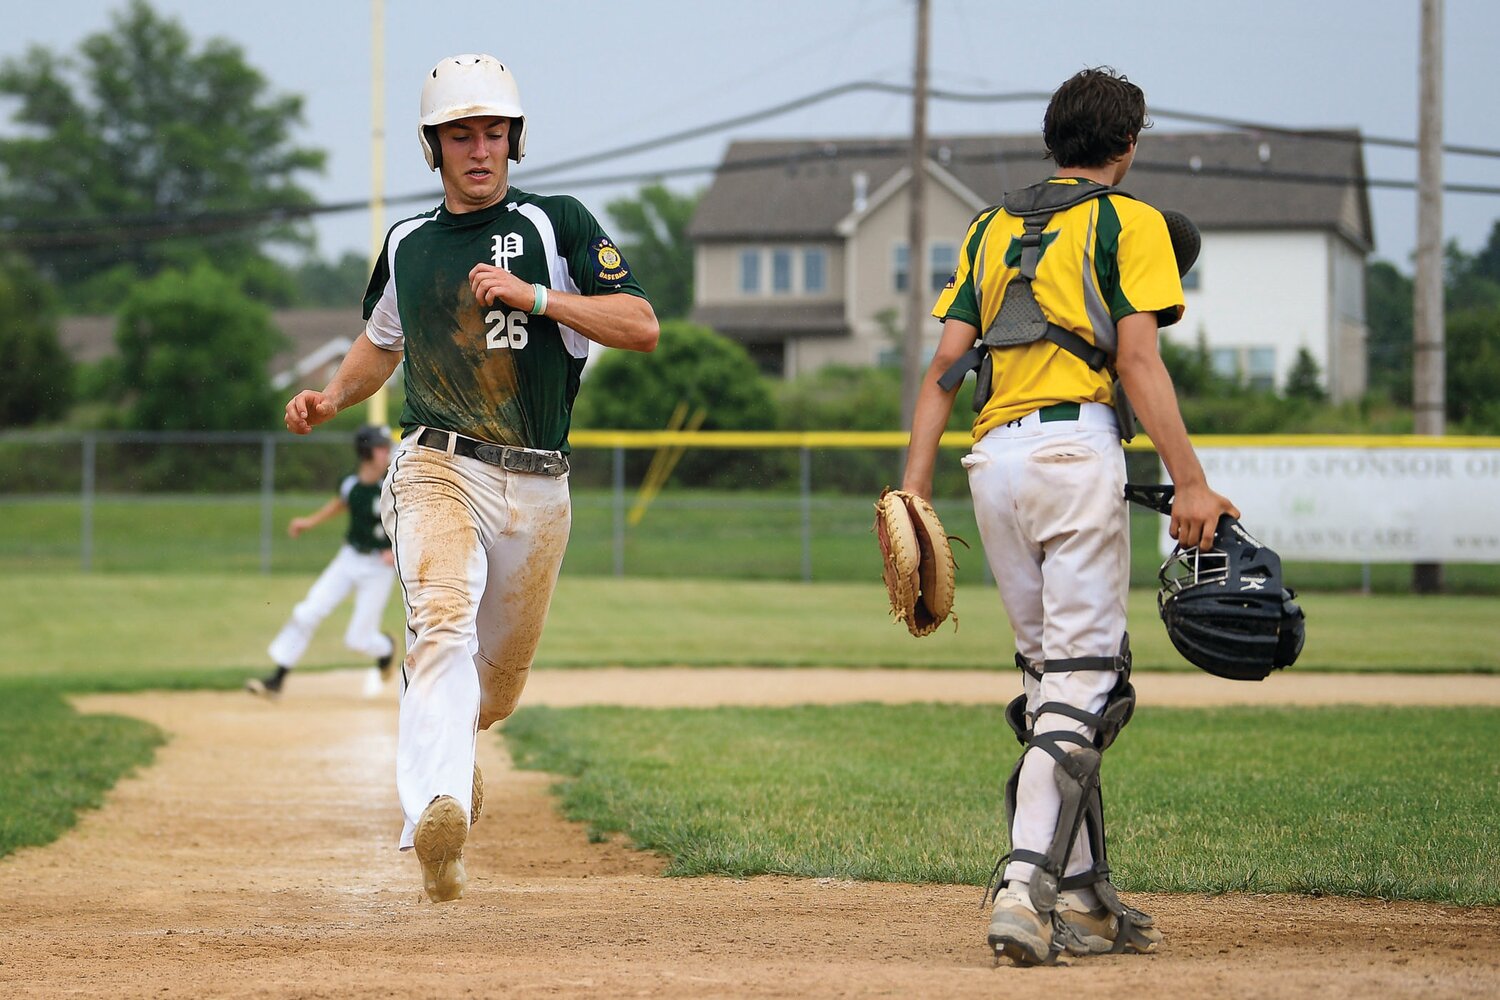 Pennridge’s Will Slamm scores on a fielder’s choice, making it 4-0 in the fourth inning of Game 1 of Sunday’s doubleheader.